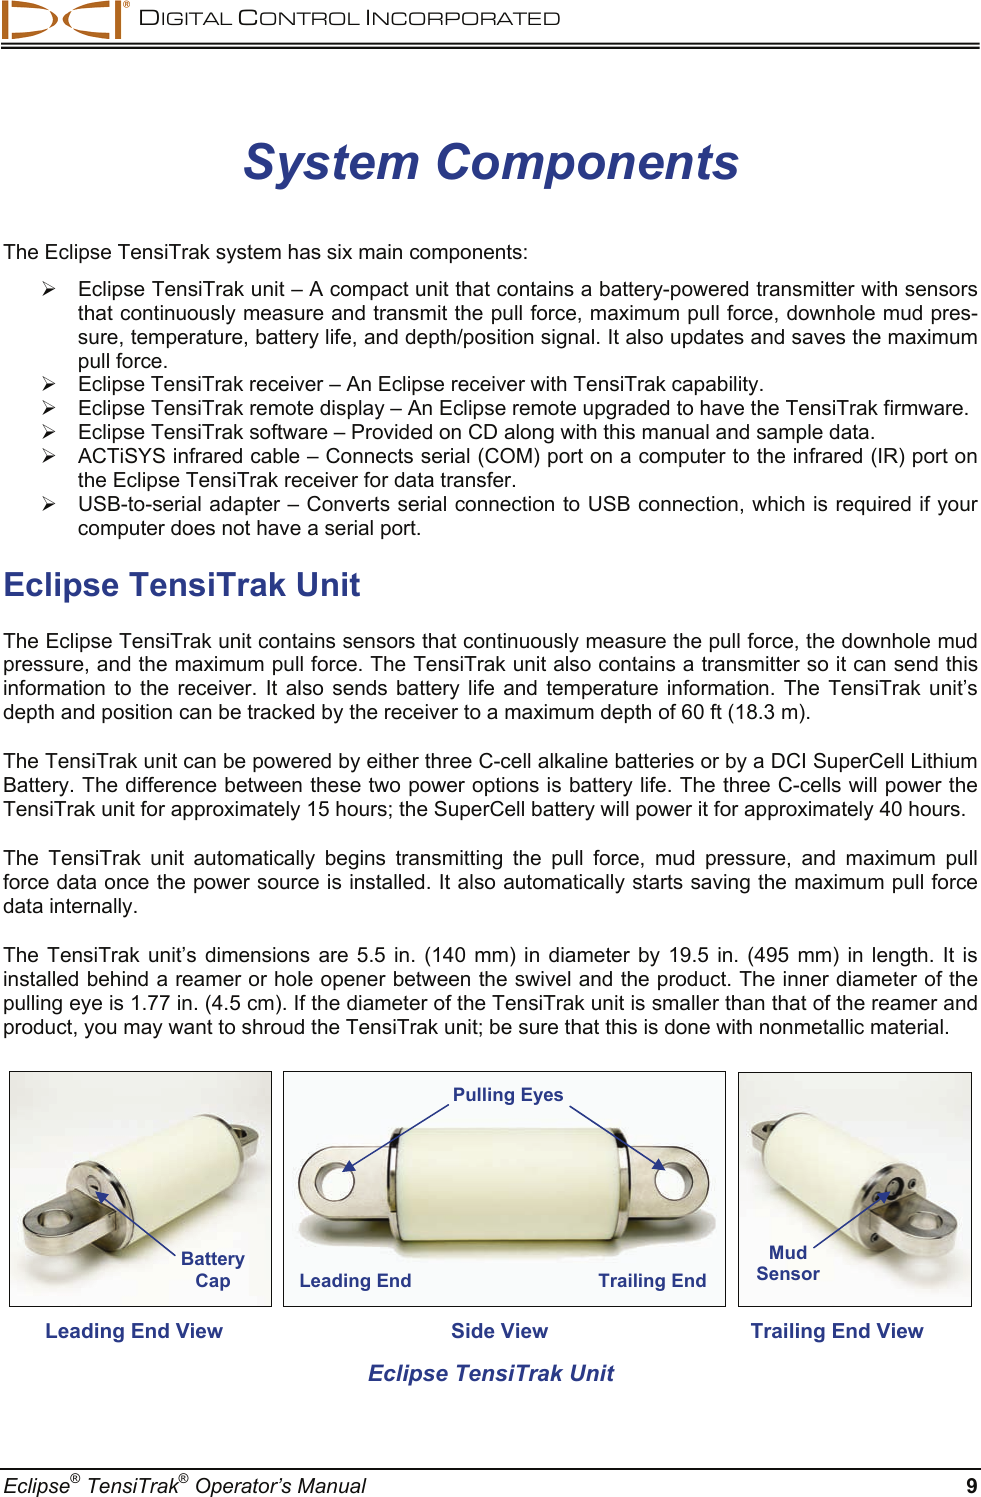  DIGITAL CONTROL INCORPORATED  Eclipse® TensiTrak® Operator’s Manual  9 System Components The Eclipse TensiTrak system has six main components: ¾  Eclipse TensiTrak unit – A compact unit that contains a battery-powered transmitter with sensors that continuously measure and transmit the pull force, maximum pull force, downhole mud pres-sure, temperature, battery life, and depth/position signal. It also updates and saves the maximum pull force.  ¾  Eclipse TensiTrak receiver – An Eclipse receiver with TensiTrak capability.  ¾  Eclipse TensiTrak remote display – An Eclipse remote upgraded to have the TensiTrak firmware.  ¾  Eclipse TensiTrak software – Provided on CD along with this manual and sample data. ¾  ACTiSYS infrared cable – Connects serial (COM) port on a computer to the infrared (IR) port on the Eclipse TensiTrak receiver for data transfer.   ¾  USB-to-serial adapter – Converts serial connection to USB connection, which is required if your computer does not have a serial port.  Eclipse TensiTrak Unit The Eclipse TensiTrak unit contains sensors that continuously measure the pull force, the downhole mud pressure, and the maximum pull force. The TensiTrak unit also contains a transmitter so it can send this information to the receiver. It also sends battery life and temperature information. The TensiTrak unit’s depth and position can be tracked by the receiver to a maximum depth of 60 ft (18.3 m). The TensiTrak unit can be powered by either three C-cell alkaline batteries or by a DCI SuperCell Lithium Battery. The difference between these two power options is battery life. The three C-cells will power the TensiTrak unit for approximately 15 hours; the SuperCell battery will power it for approximately 40 hours. The TensiTrak unit automatically begins transmitting the pull force, mud pressure, and maximum pull force data once the power source is installed. It also automatically starts saving the maximum pull force data internally. The TensiTrak unit’s dimensions are 5.5 in. (140 mm) in diameter by 19.5 in. (495 mm) in length. It is installed behind a reamer or hole opener between the swivel and the product. The inner diameter of the pulling eye is 1.77 in. (4.5 cm). If the diameter of the TensiTrak unit is smaller than that of the reamer and product, you may want to shroud the TensiTrak unit; be sure that this is done with nonmetallic material.          Leading End View  Side View  Trailing End View Eclipse TensiTrak Unit Leading End Trailing EndMud Sensor Battery Cap Pulling Eyes